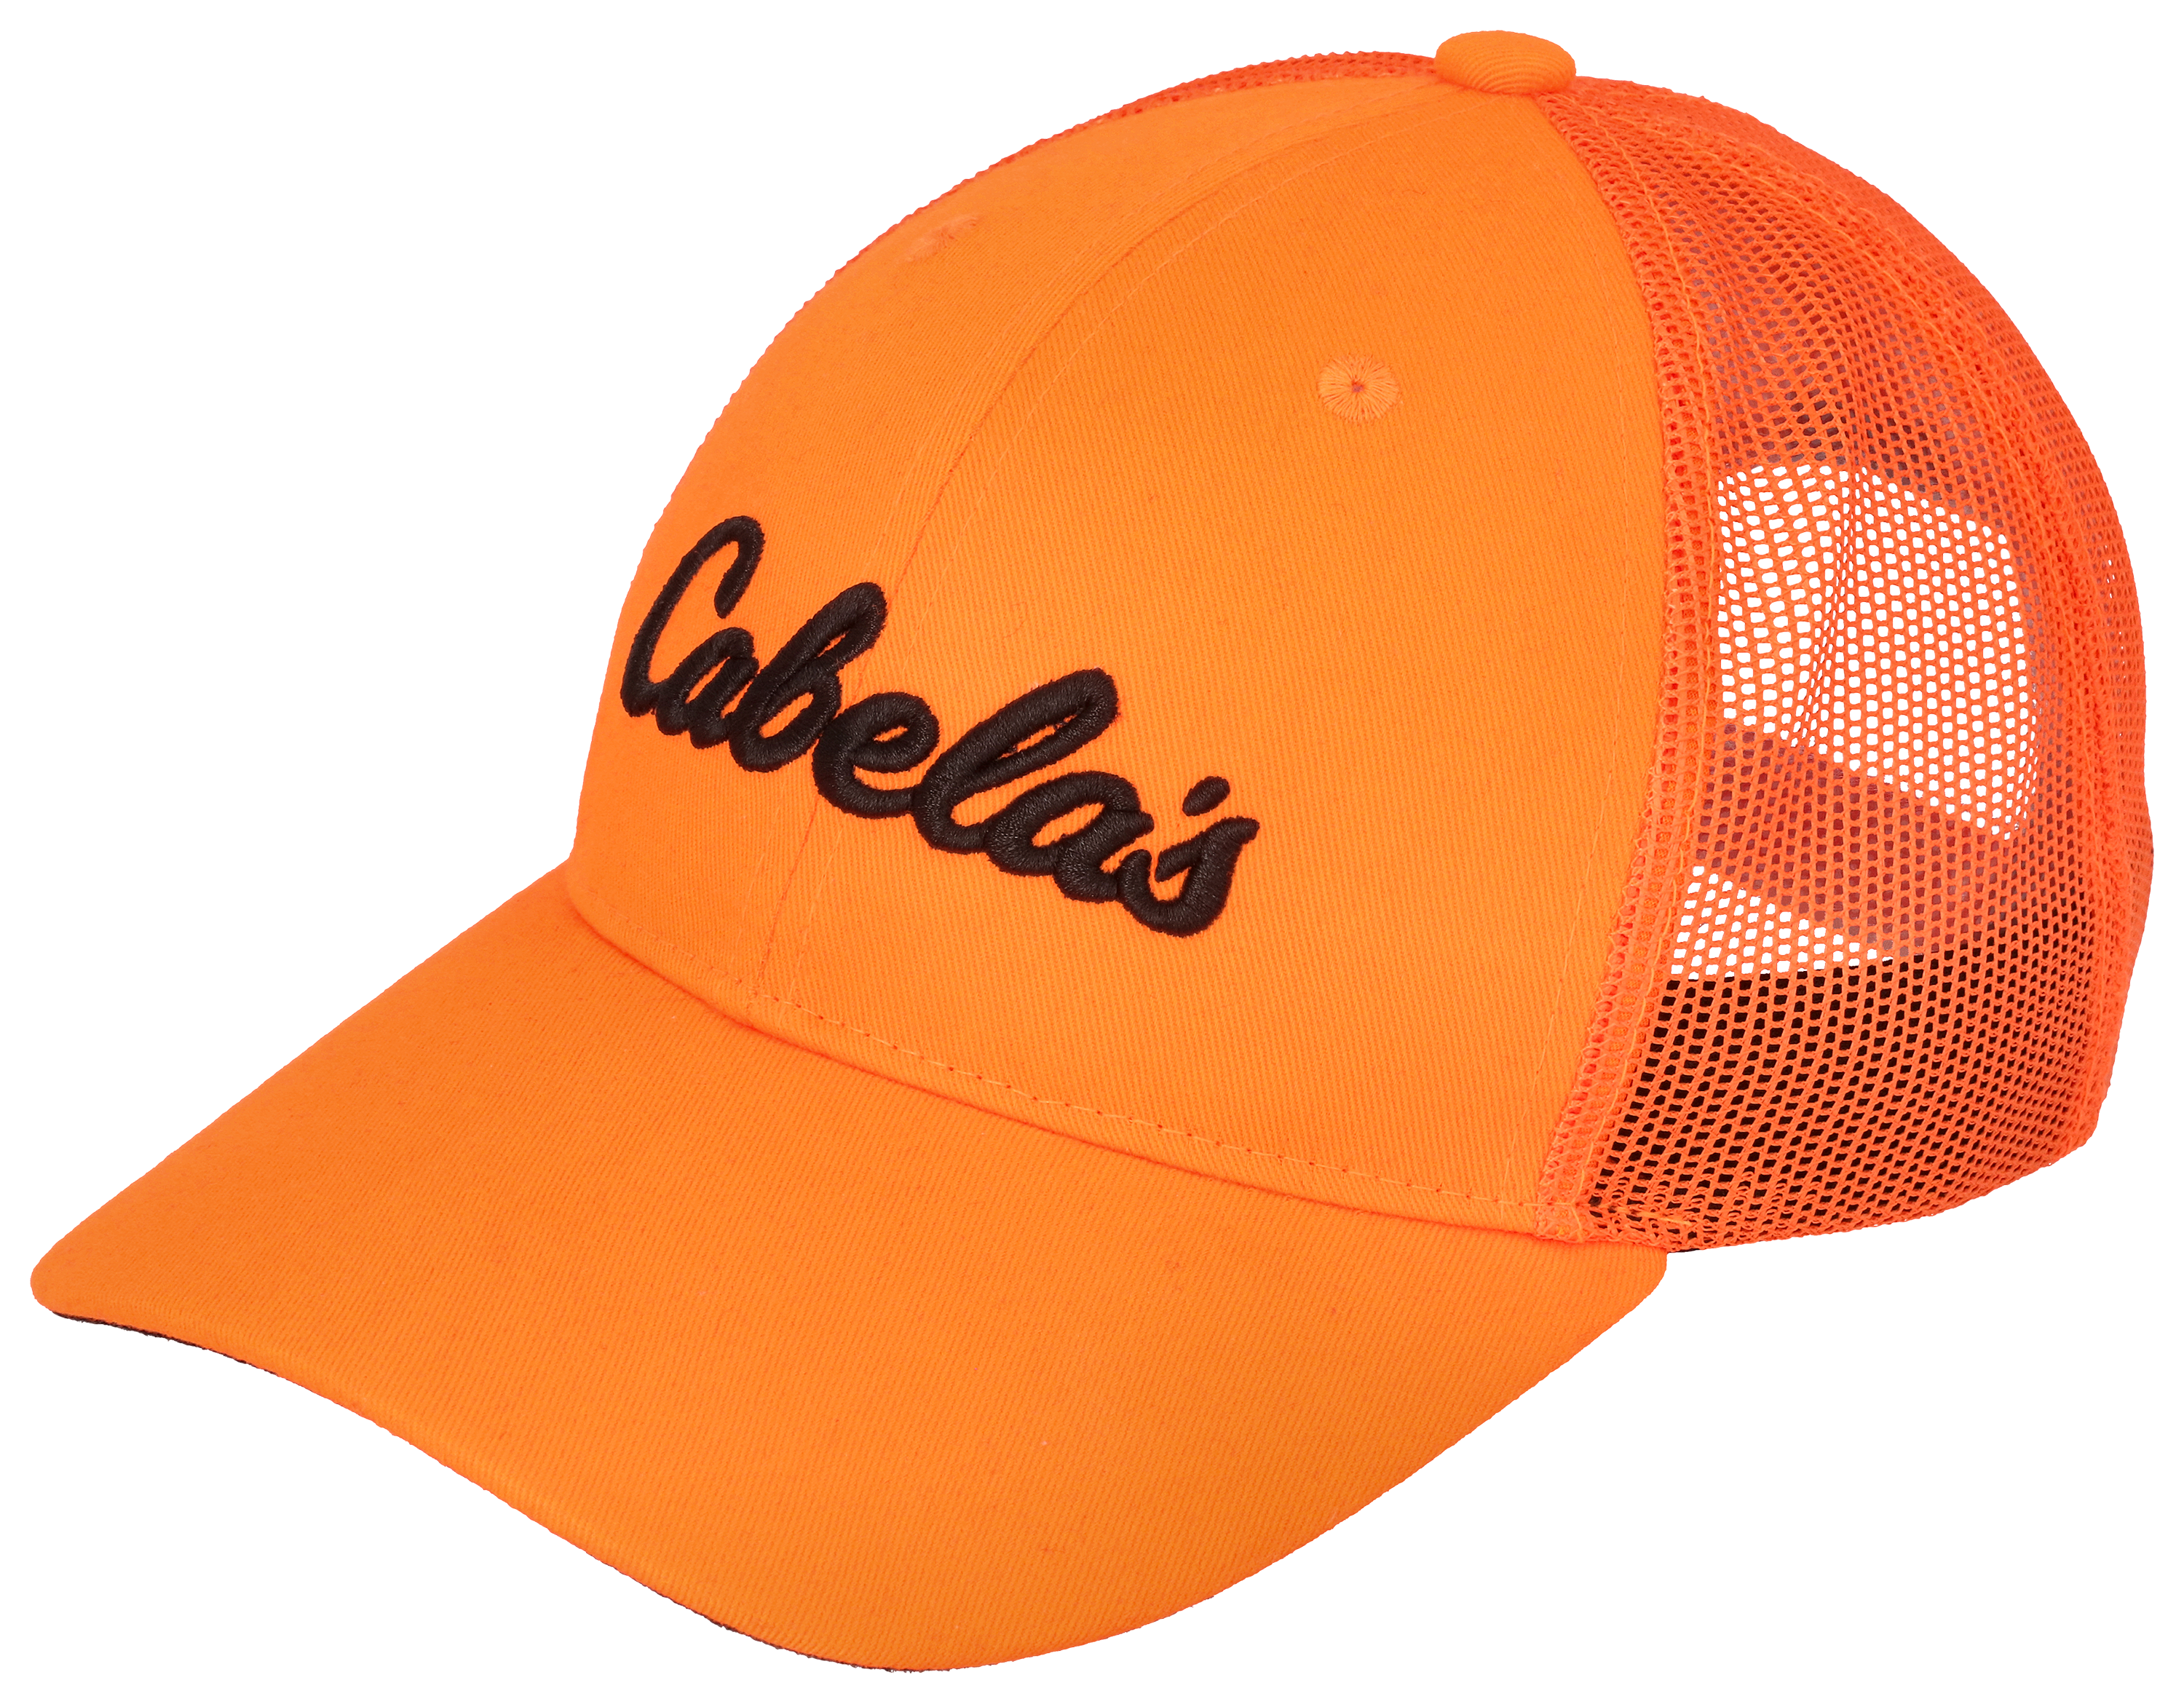 Cabela's Headlamp in a Hat 3.0 Rechargeable Lighted Cap